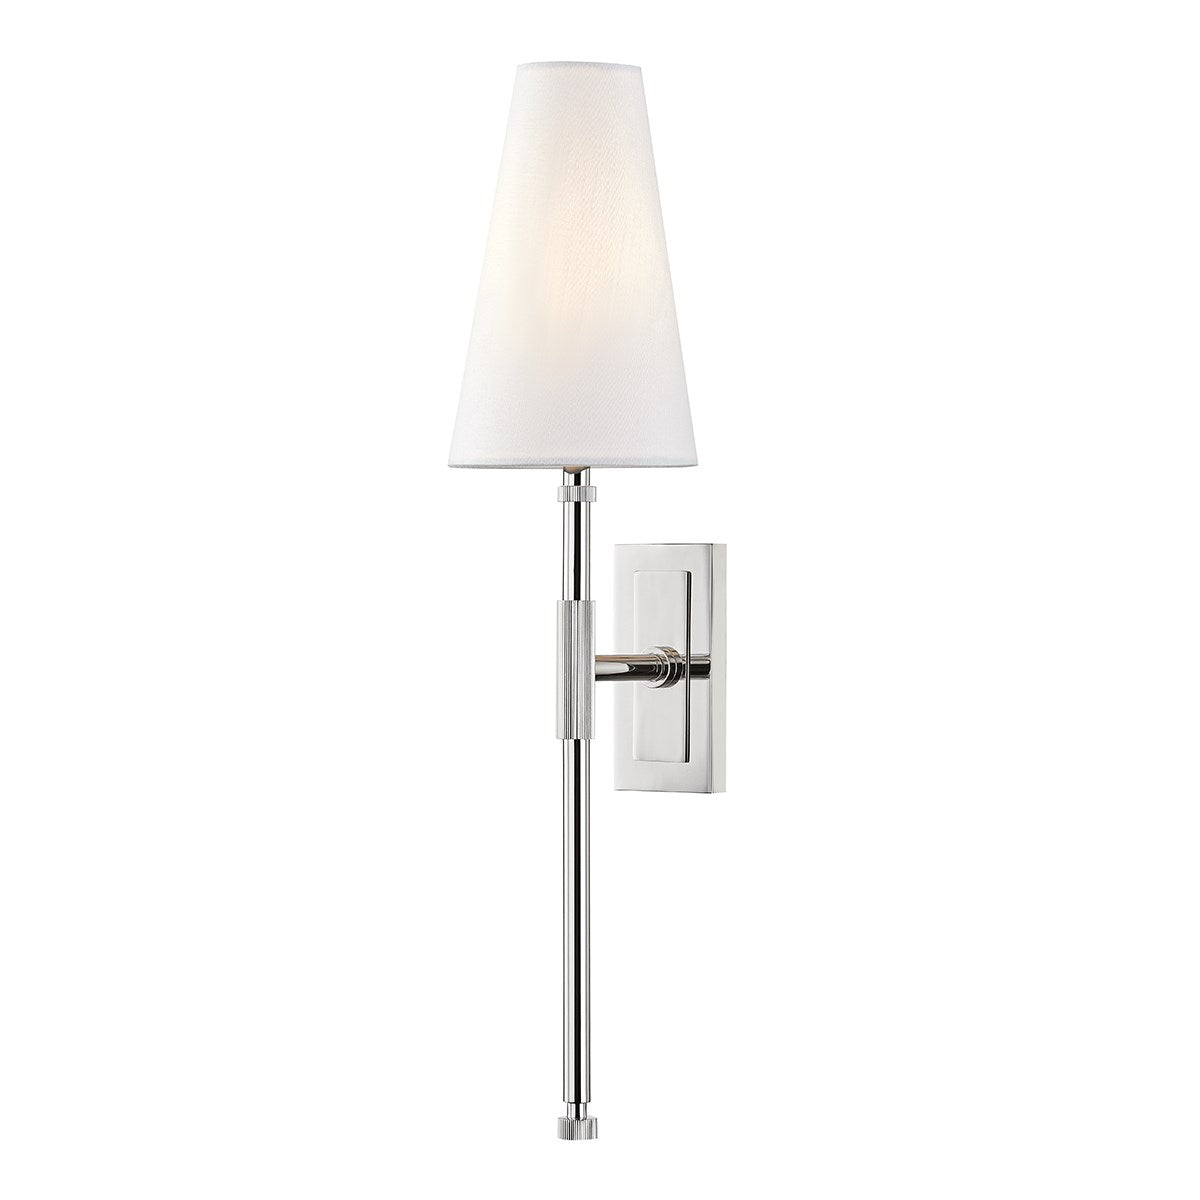 Bowery - 1 LIGHT WALL SCONCE Wall Light Fixtures Hudson Valley Polished Nickel  